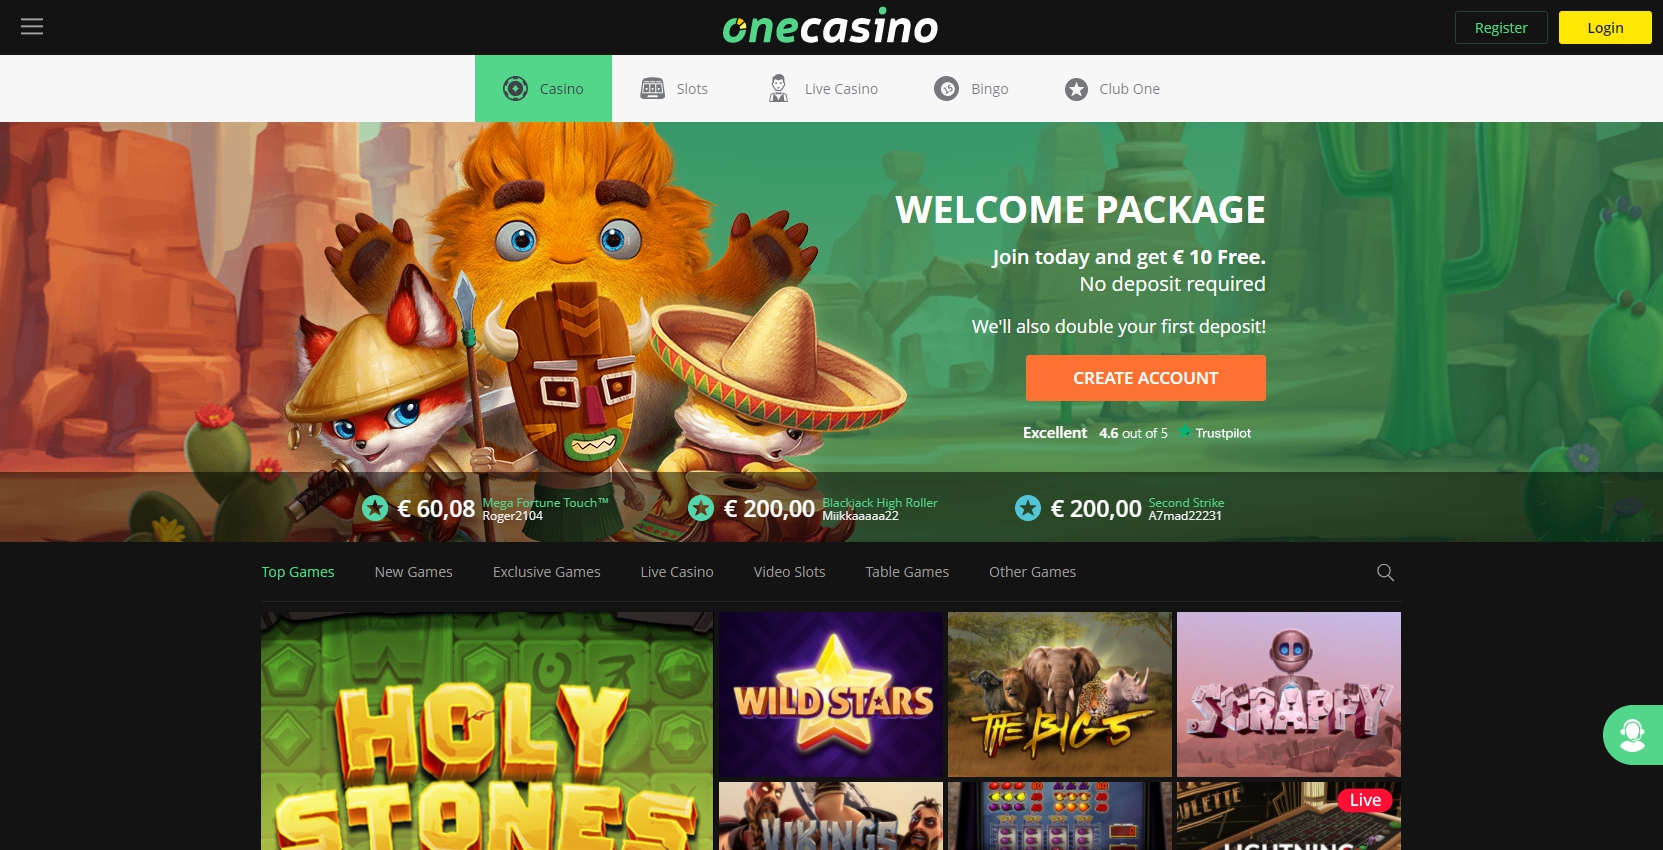 Warning: These 9 Mistakes Will Destroy Your twin casino login